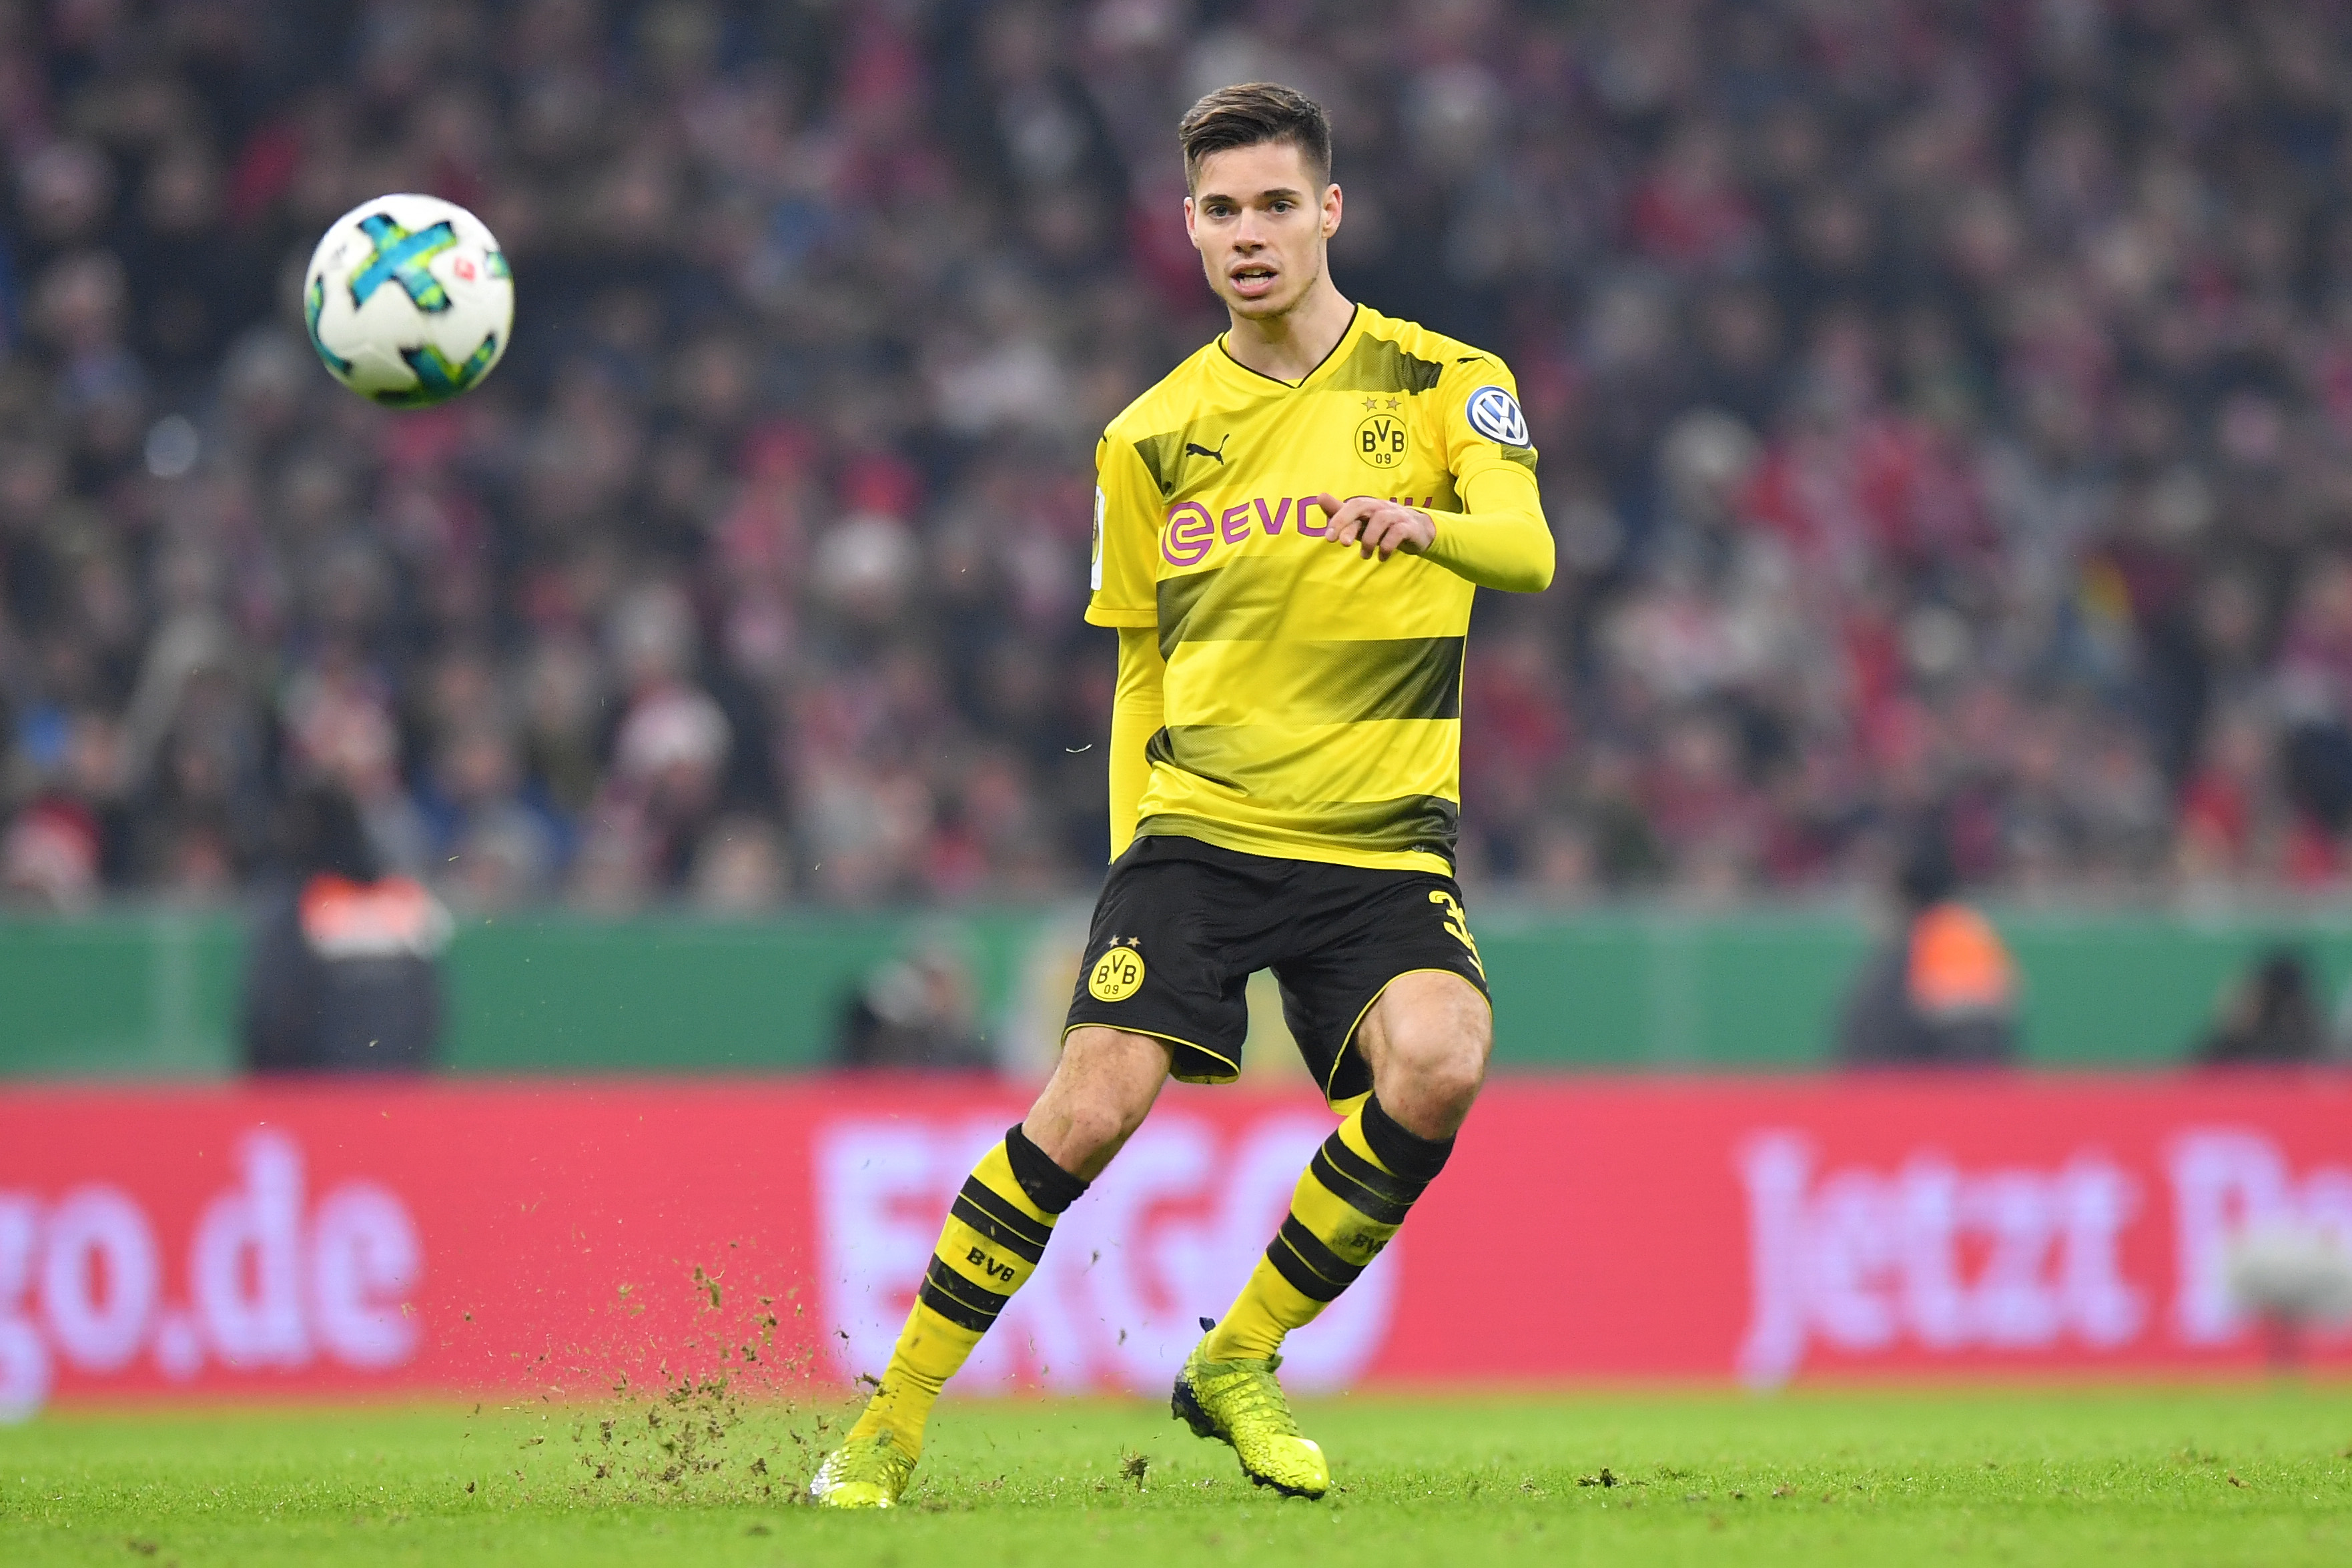 MUNICH, GERMANY - DECEMBER 20: Julian Weigl of Dortmund plays the ball during the DFB Cup match between Bayern Muenchen and Borussia Dortmund at Allianz Arena on December 20, 2017 in Munich, Germany. (Photo by Sebastian Widmann/Bongarts/Getty Images)